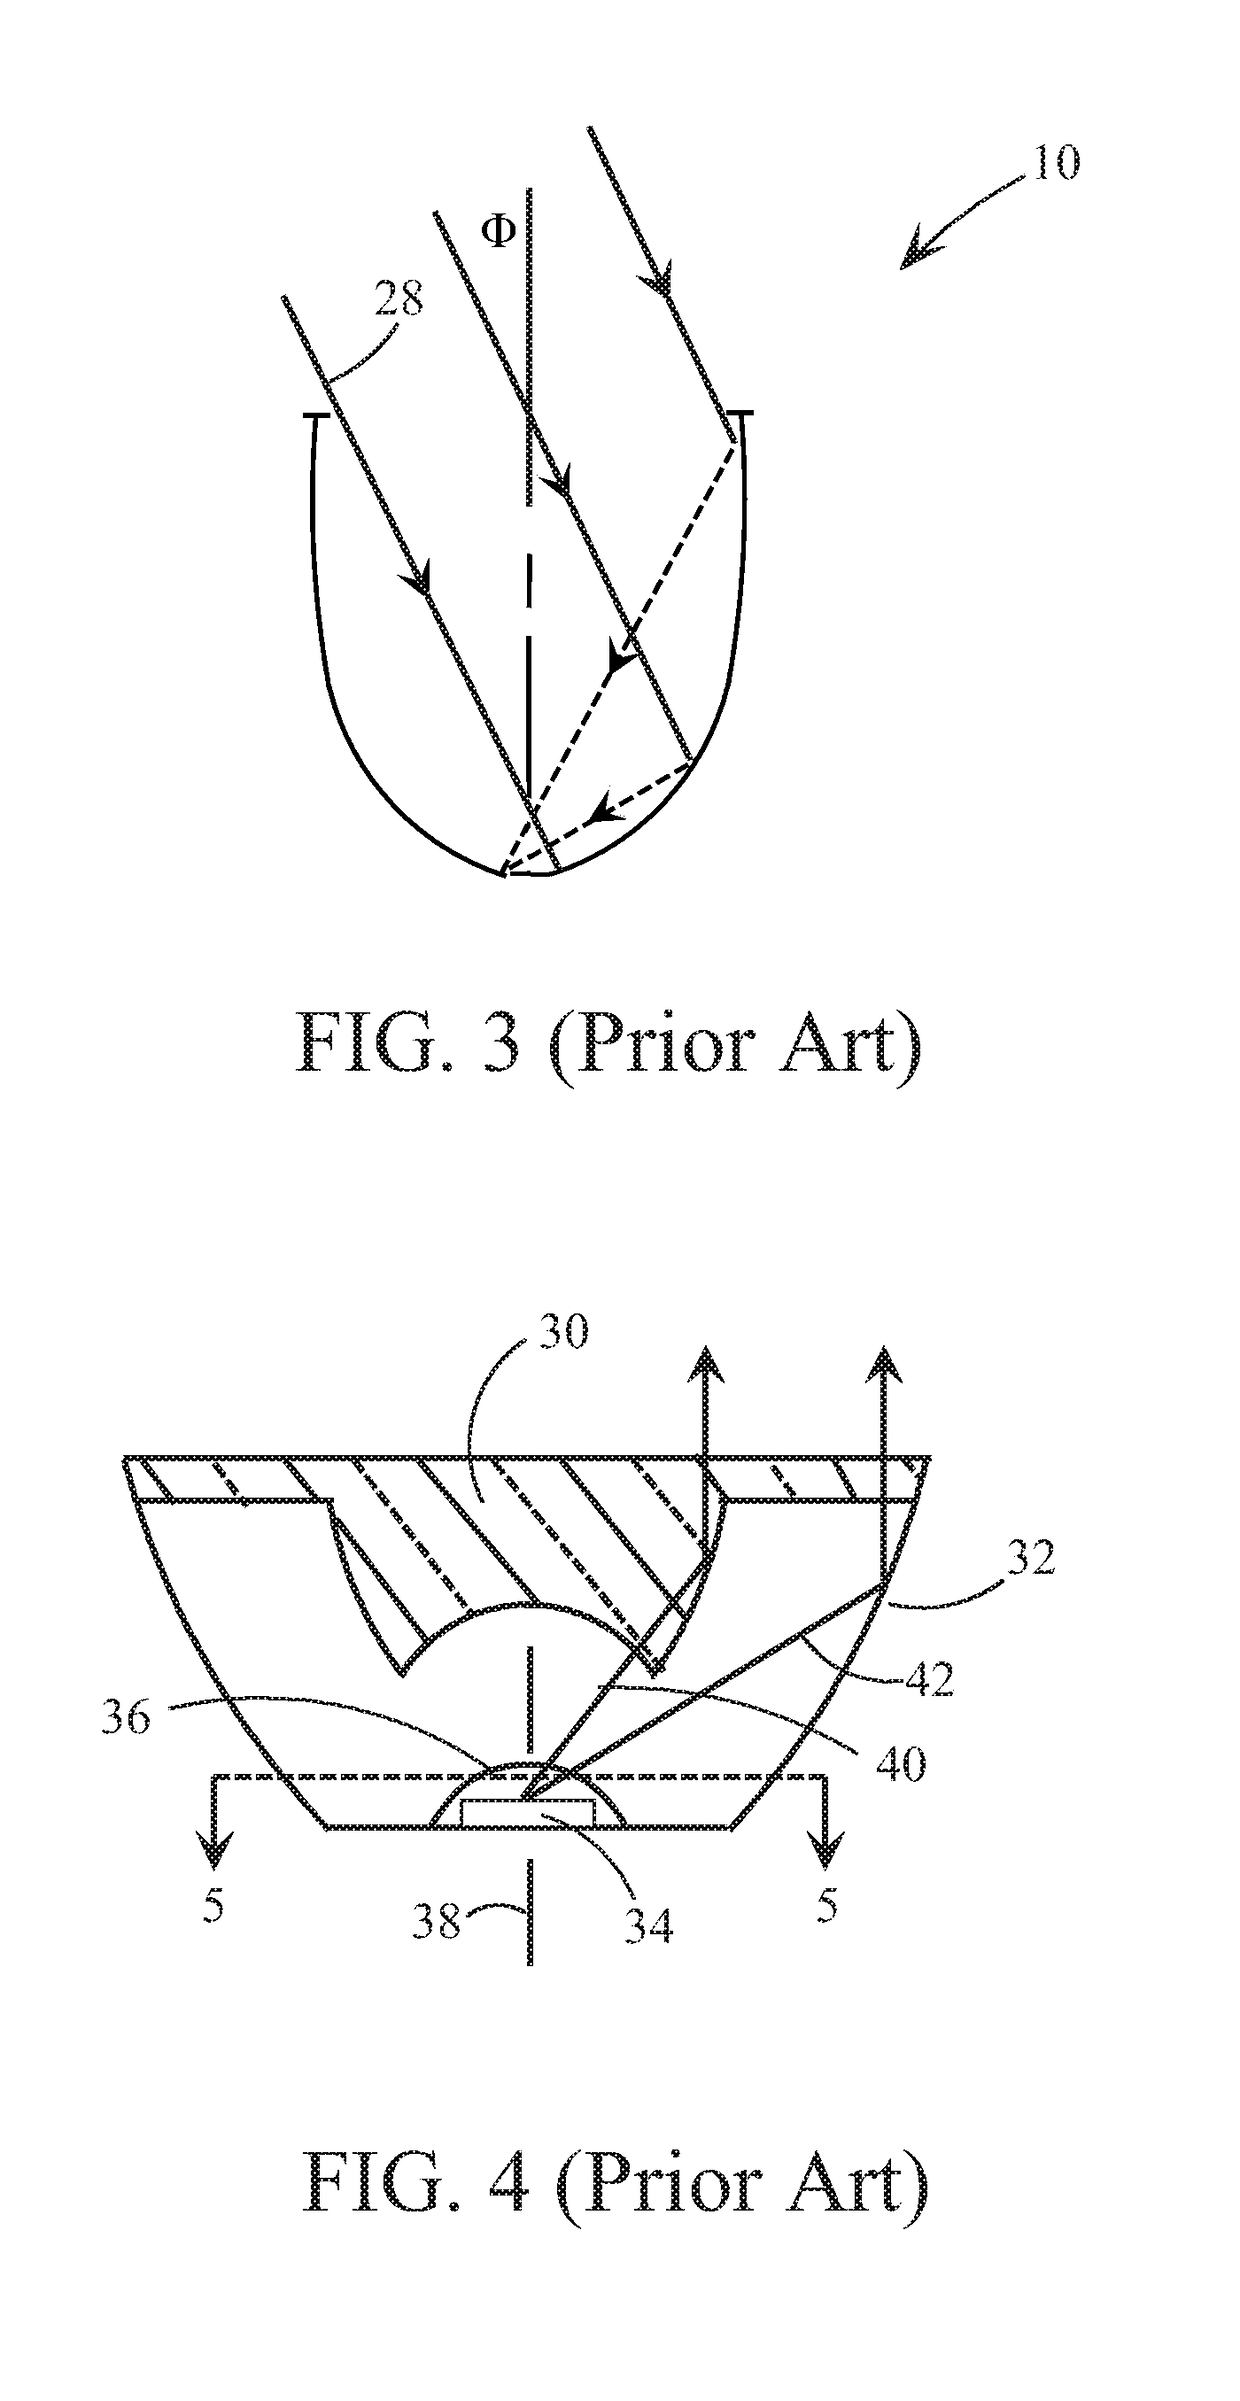 Total internal reflection lens having a tapered sidewall entry and a concave spherical exit bounded by a compound parabolic concentrator outer surface to lessen glare while maintaining color mixing and beam control of an LED light source